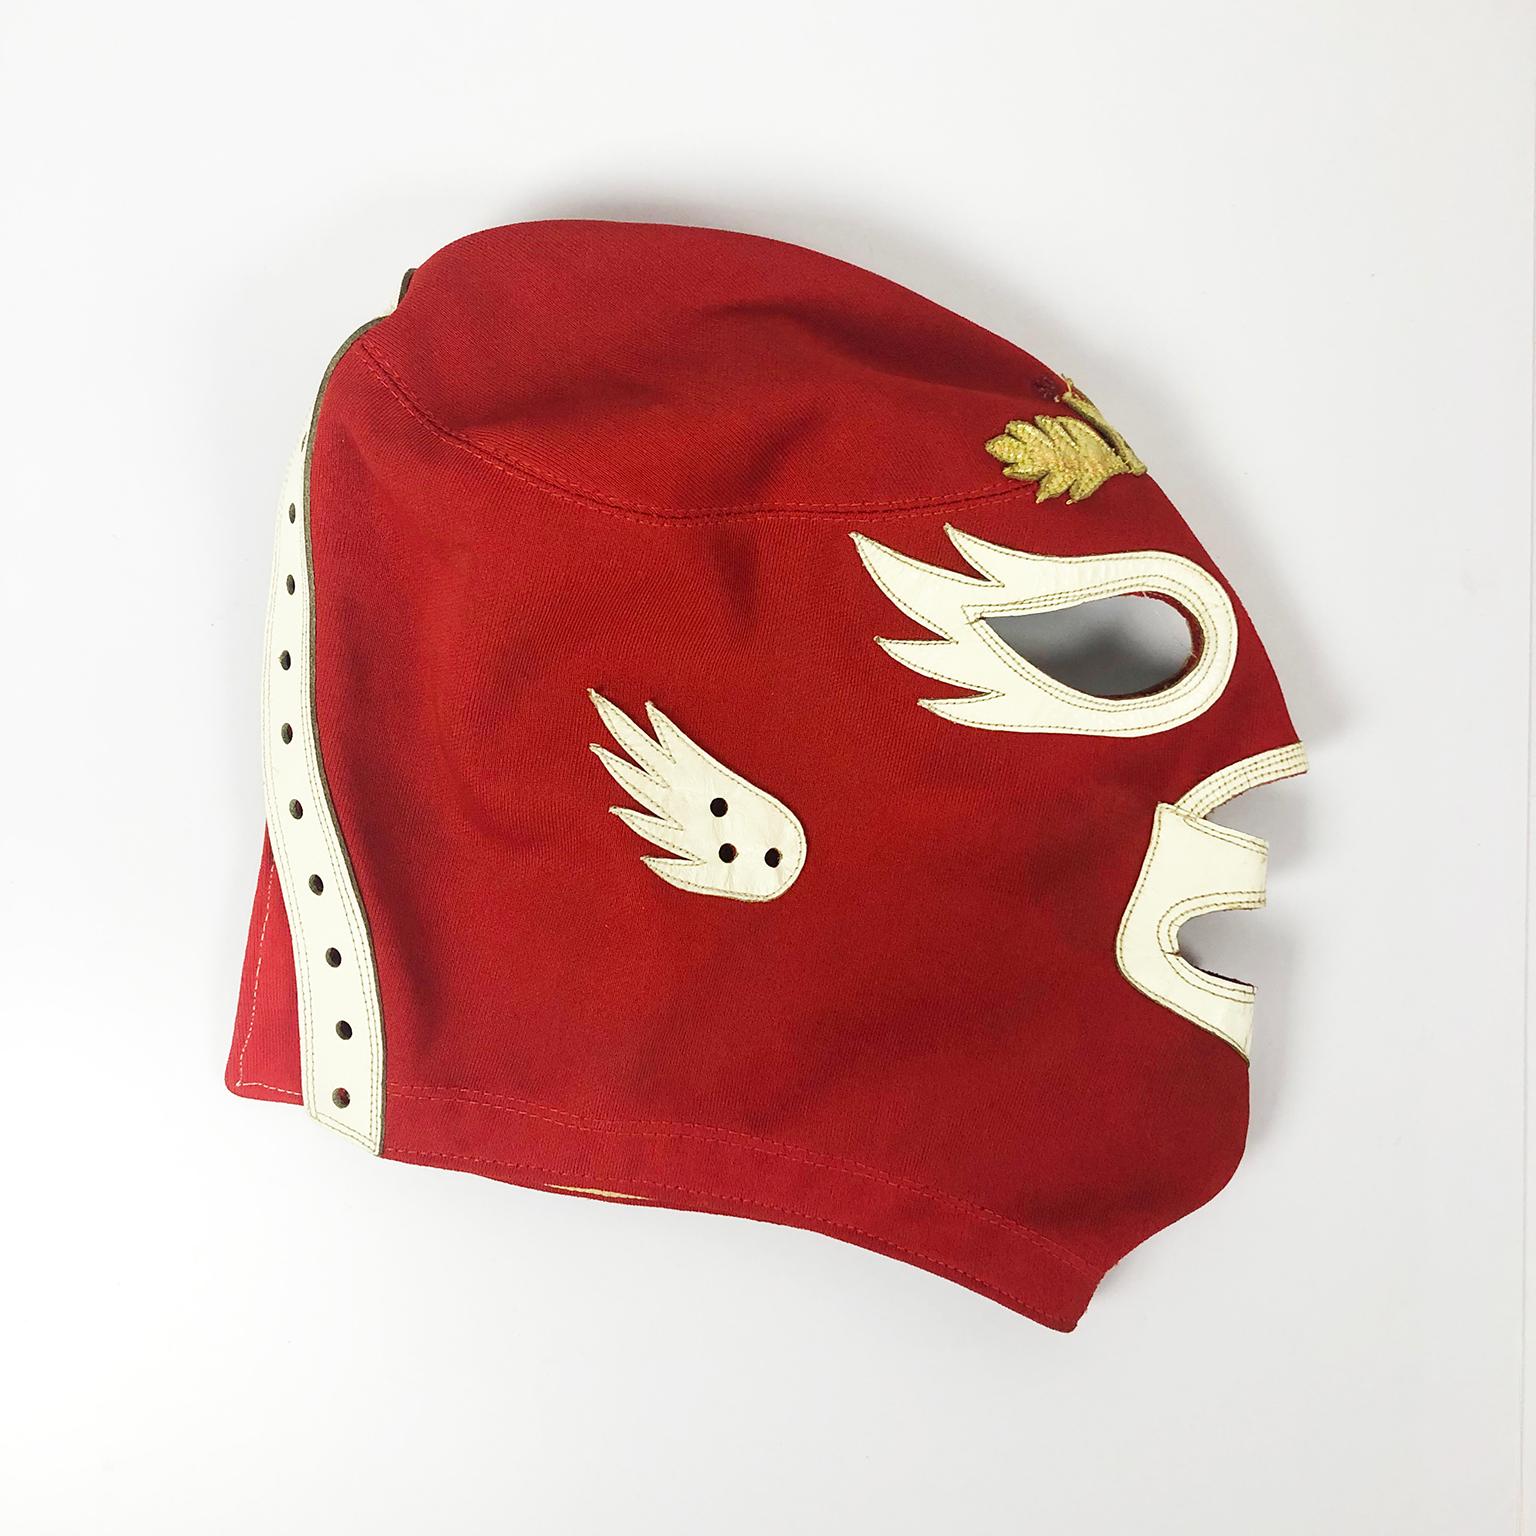 We offer this rare Original Mexican Wrestling Mask made in Mexico by one of the first families of mask making Ranulfo Lopez, M E Hijo. They have the right size and molds to all early lucha libre stars. Ranulfo was Santos personal mask maker for many